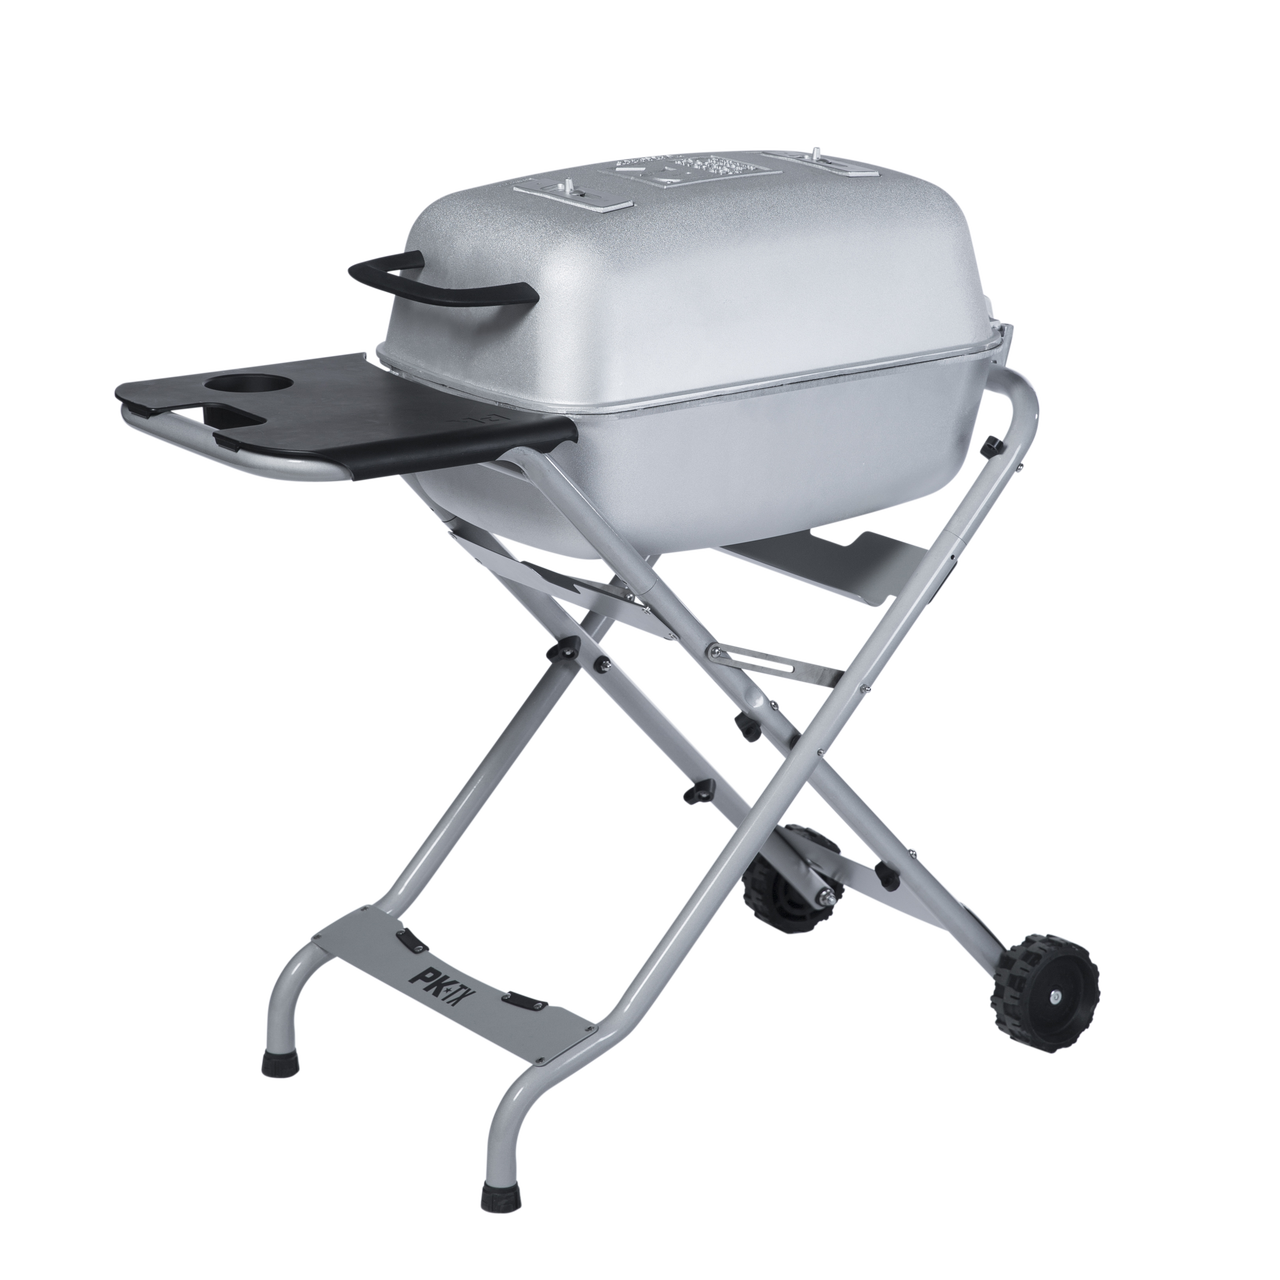 PKTX-Original-Silver-Grill-03-Left.png